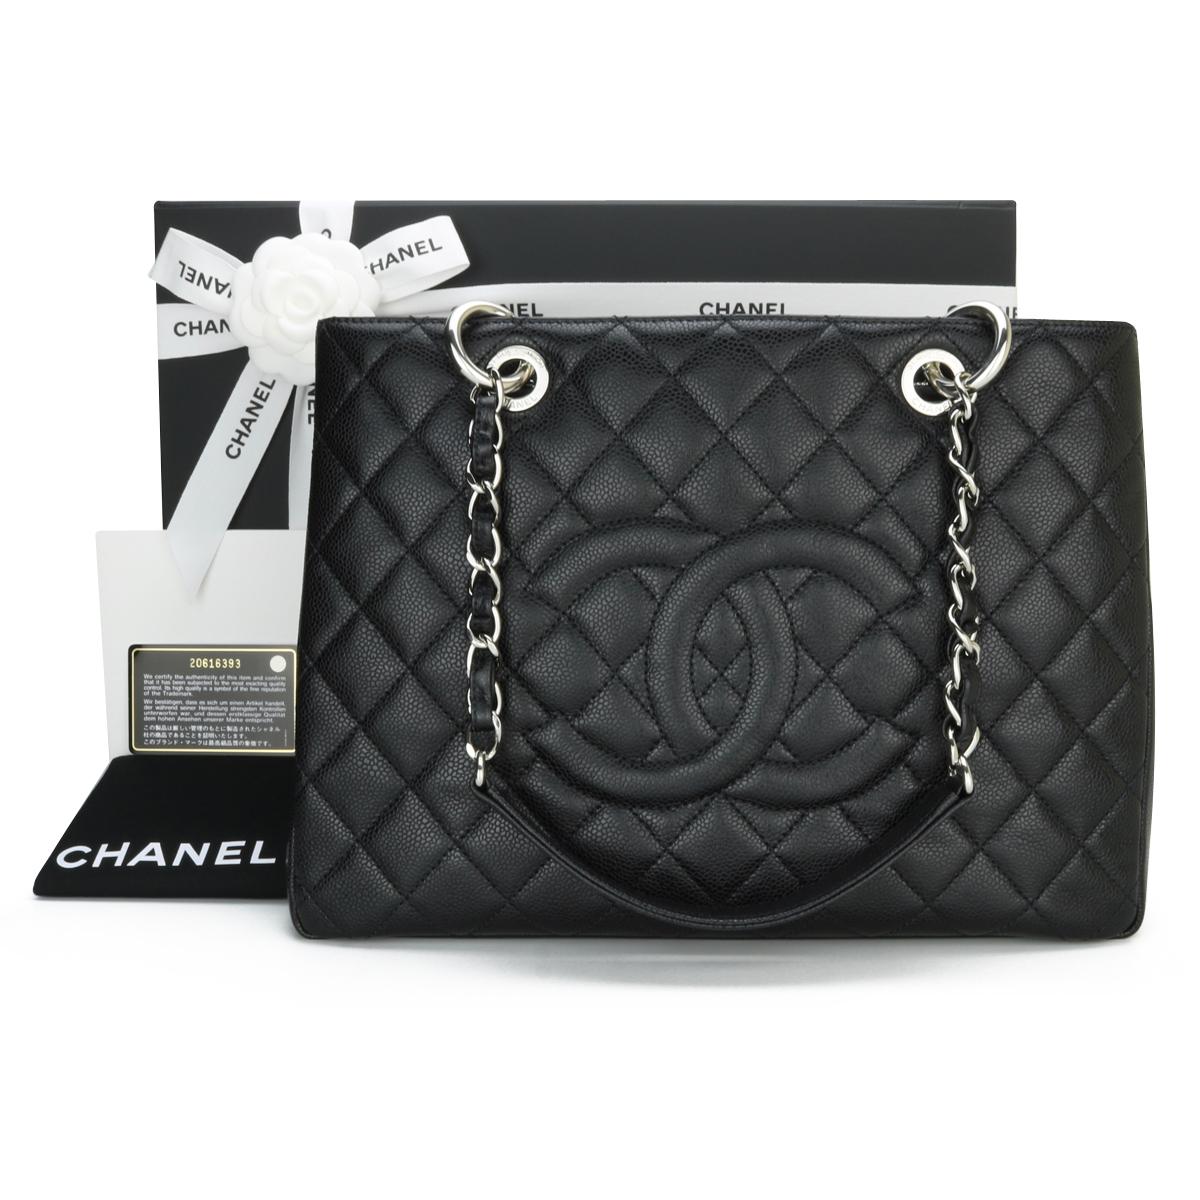 CHANEL Grand Shopping Tote (GST) Black Caviar with Silver Hardware 2015.

This bag is in excellent condition, the bag still holds its shape well, and the hardware is still very shiny.

As Chanel has discontinued the Grand Shopping Tote (GST), it is